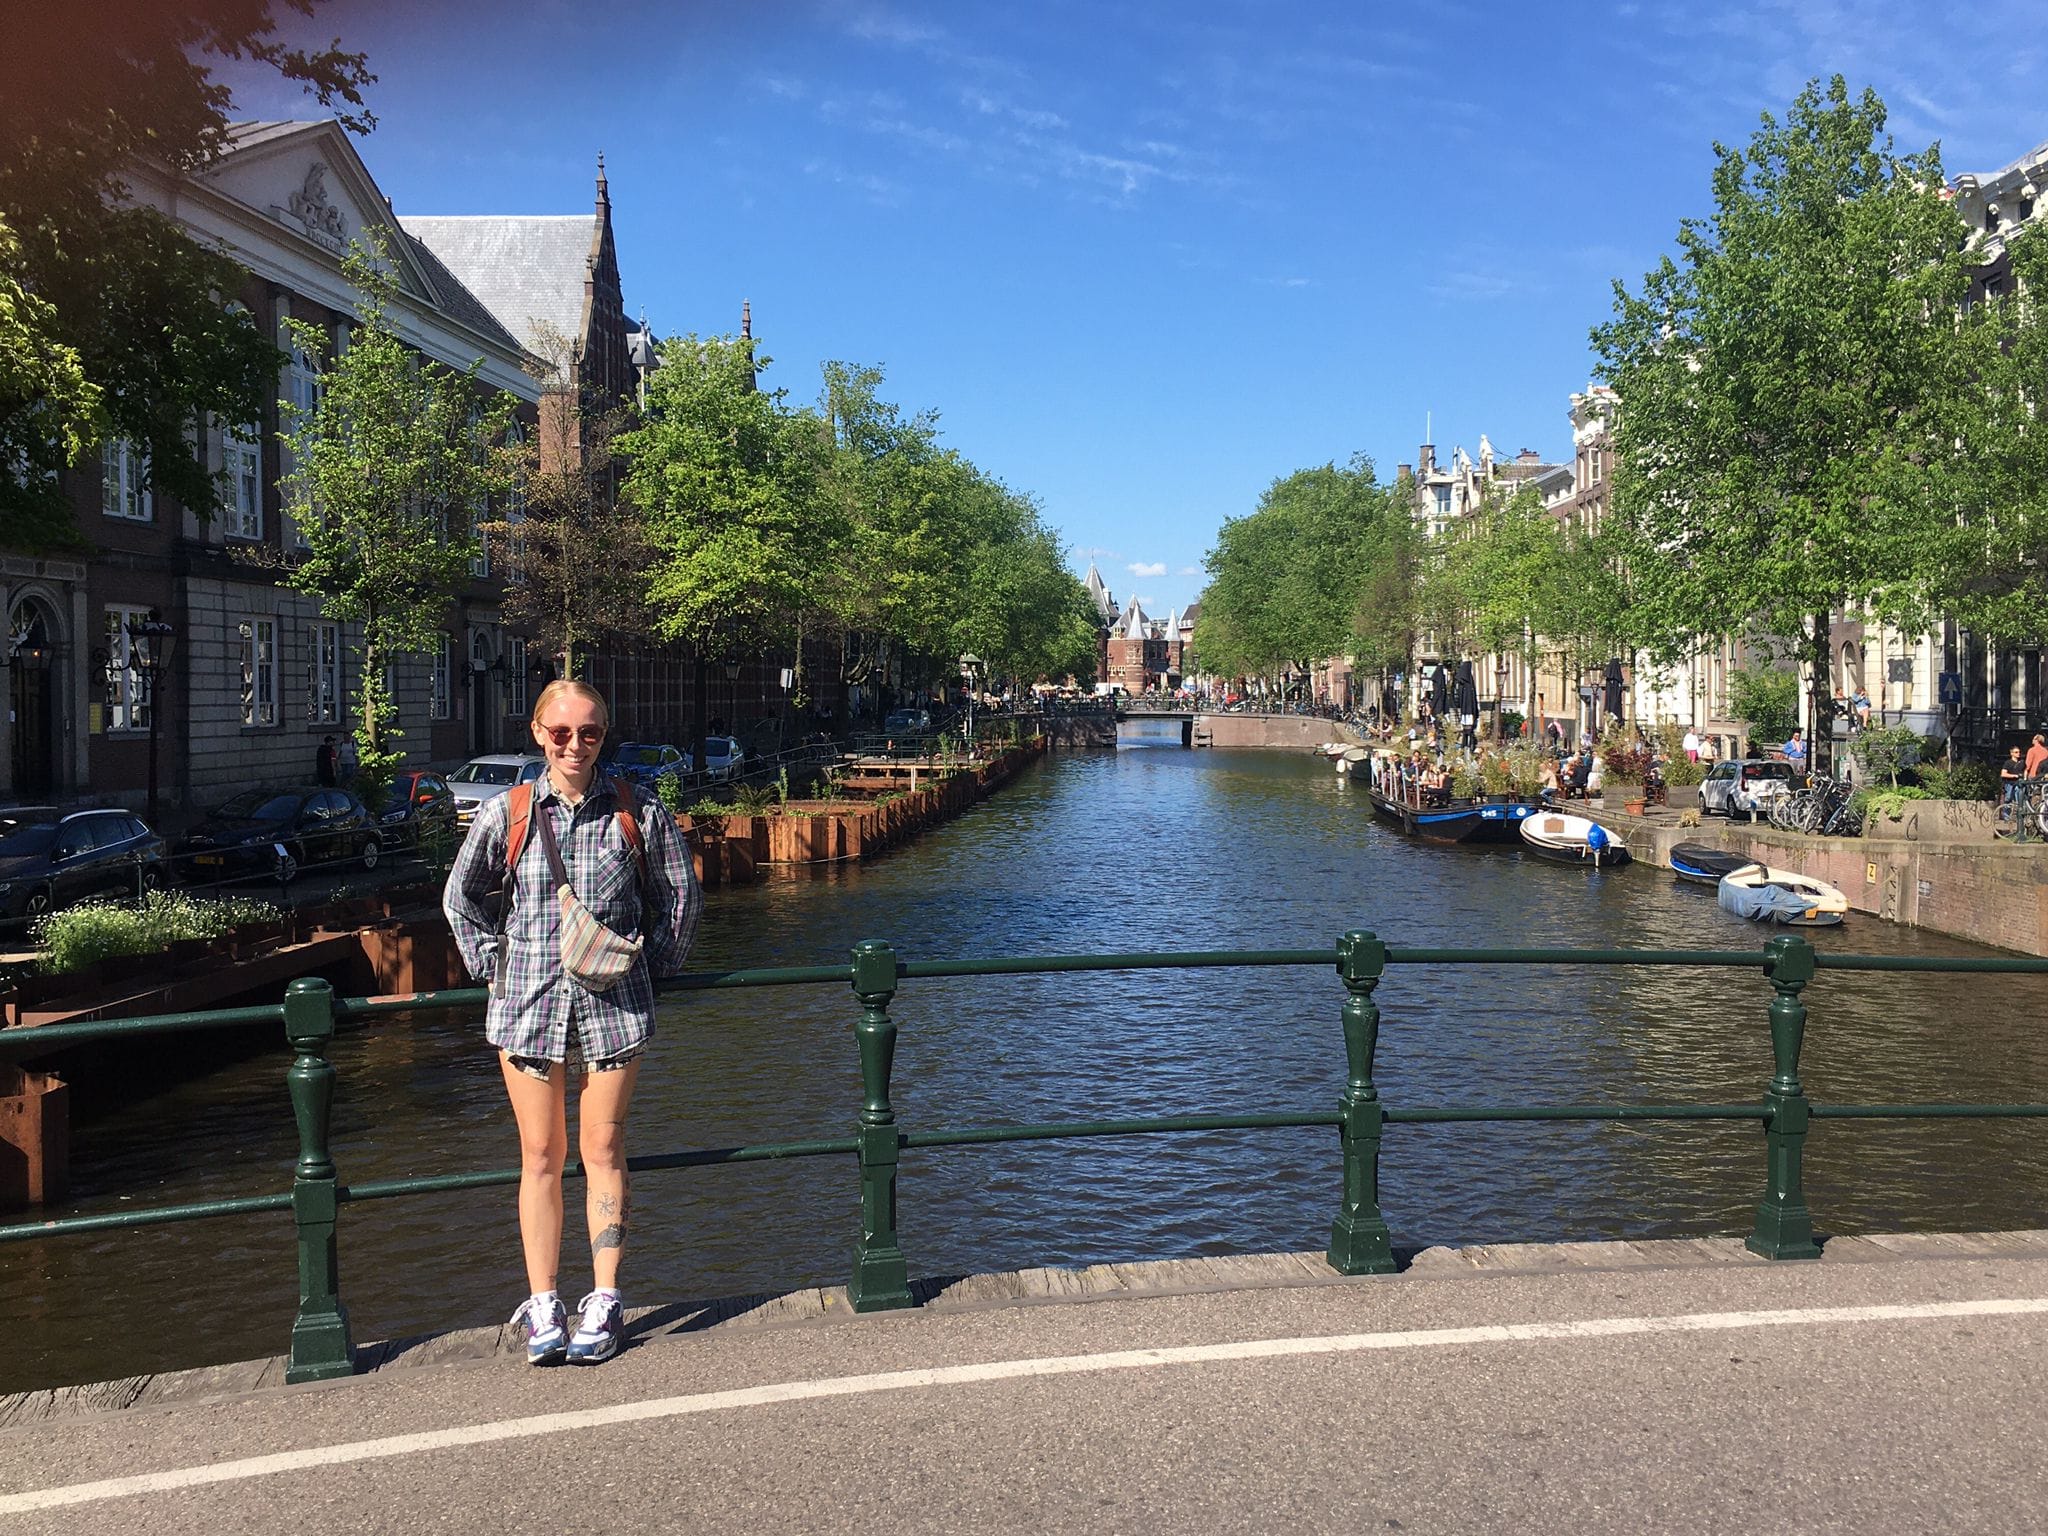 Laura stood smiling on a canal bridge in Amsterdam on a sunny day